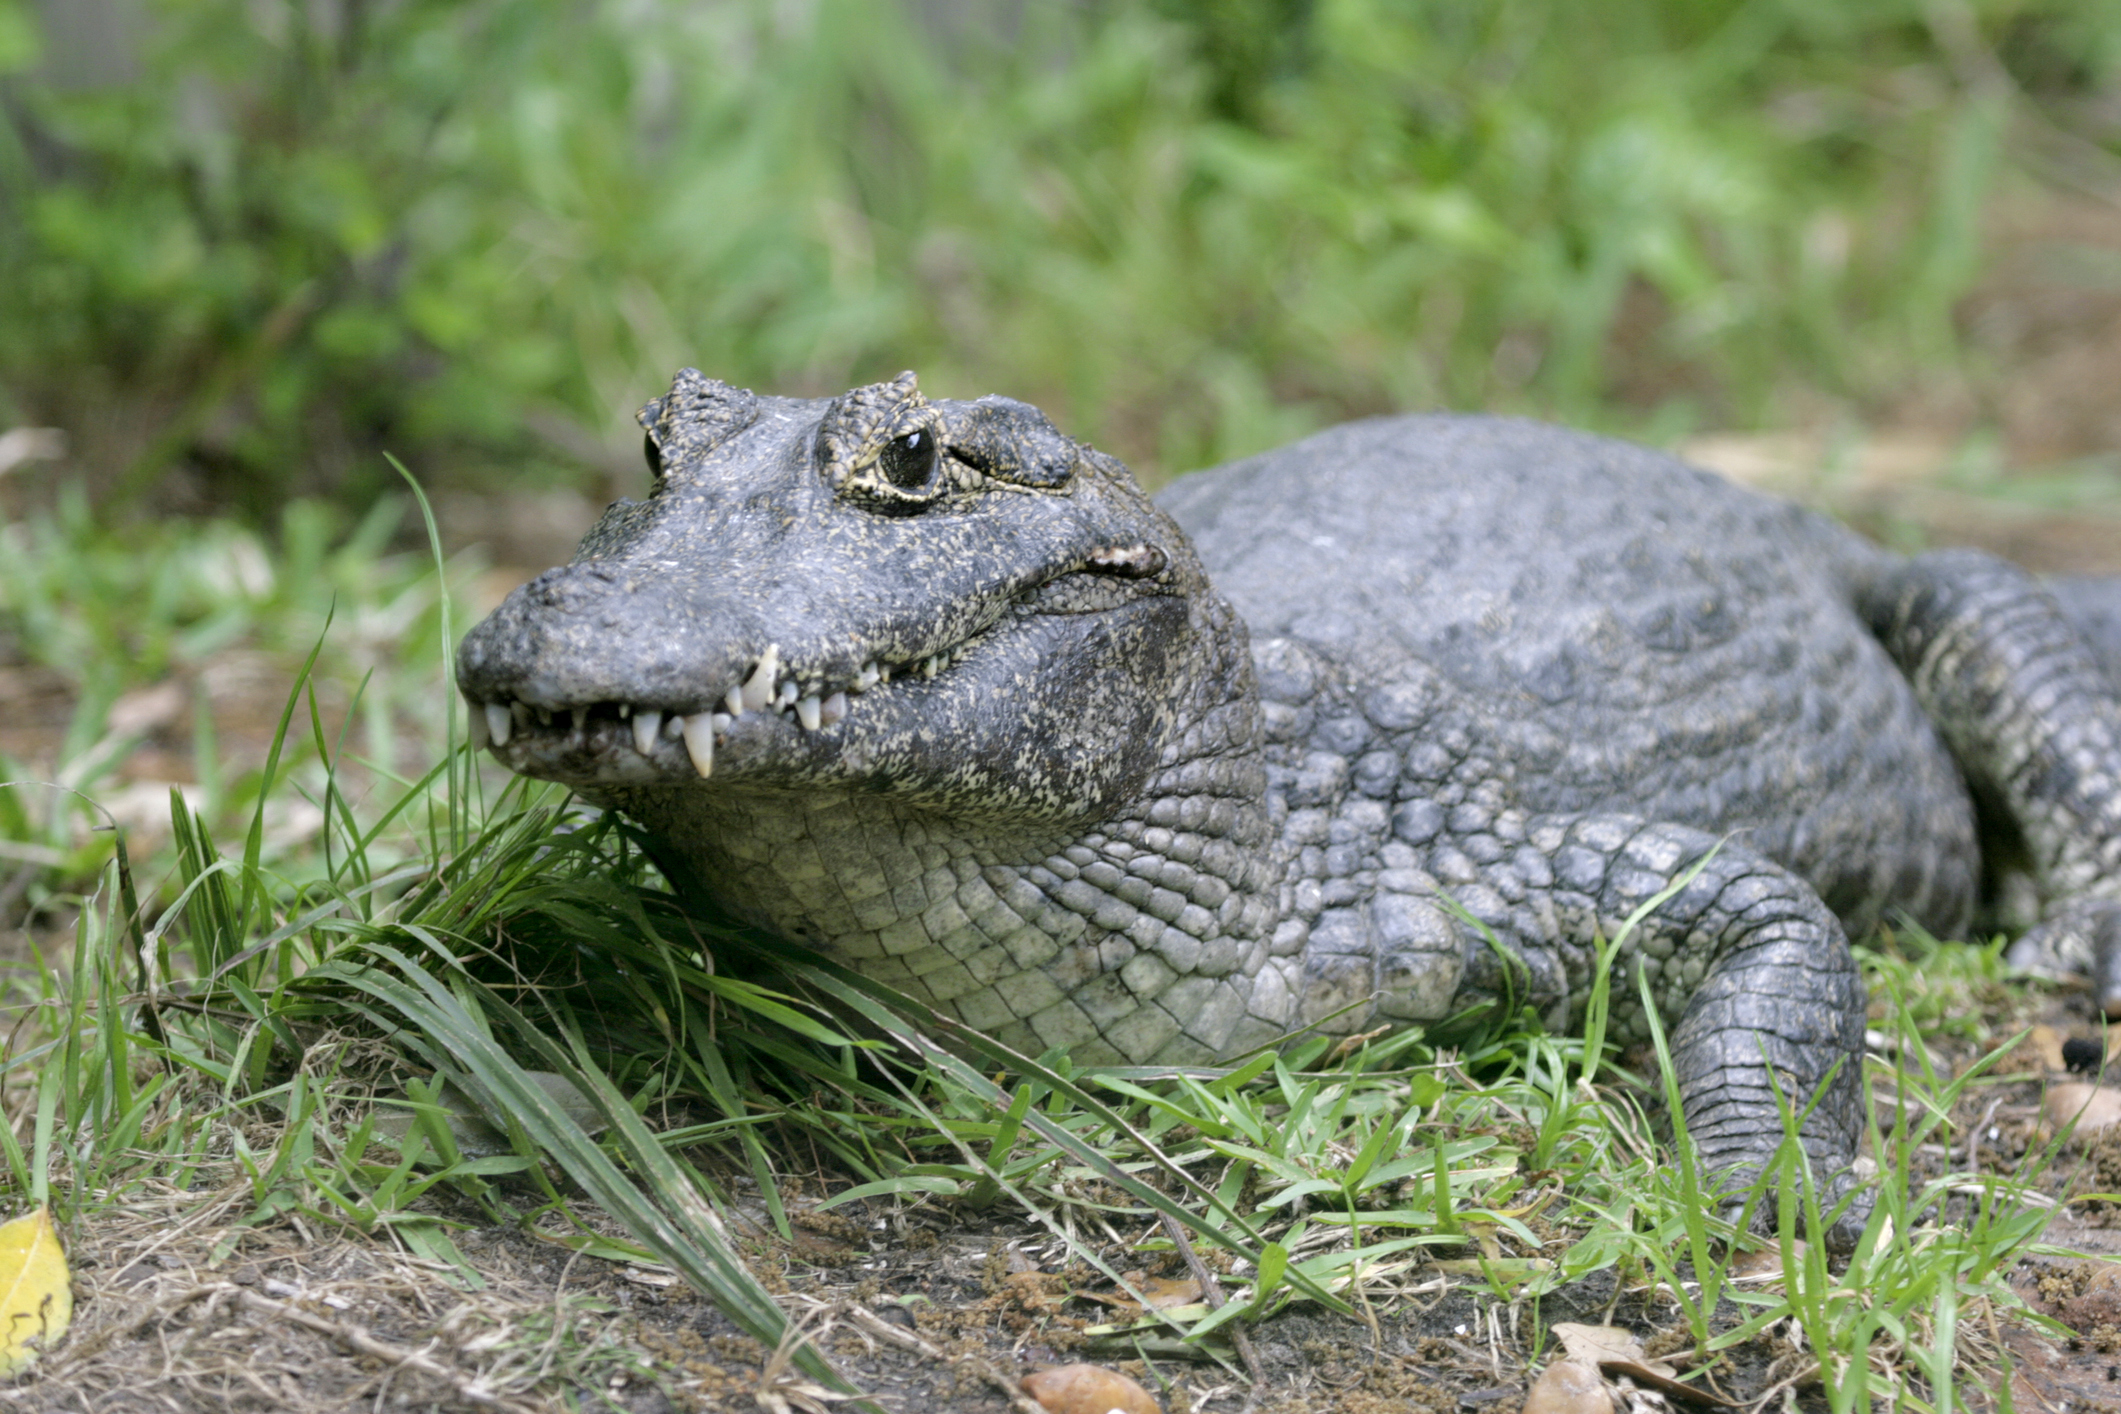 A dwarf caiman, which is held under license in Angus. (Image: iStock)